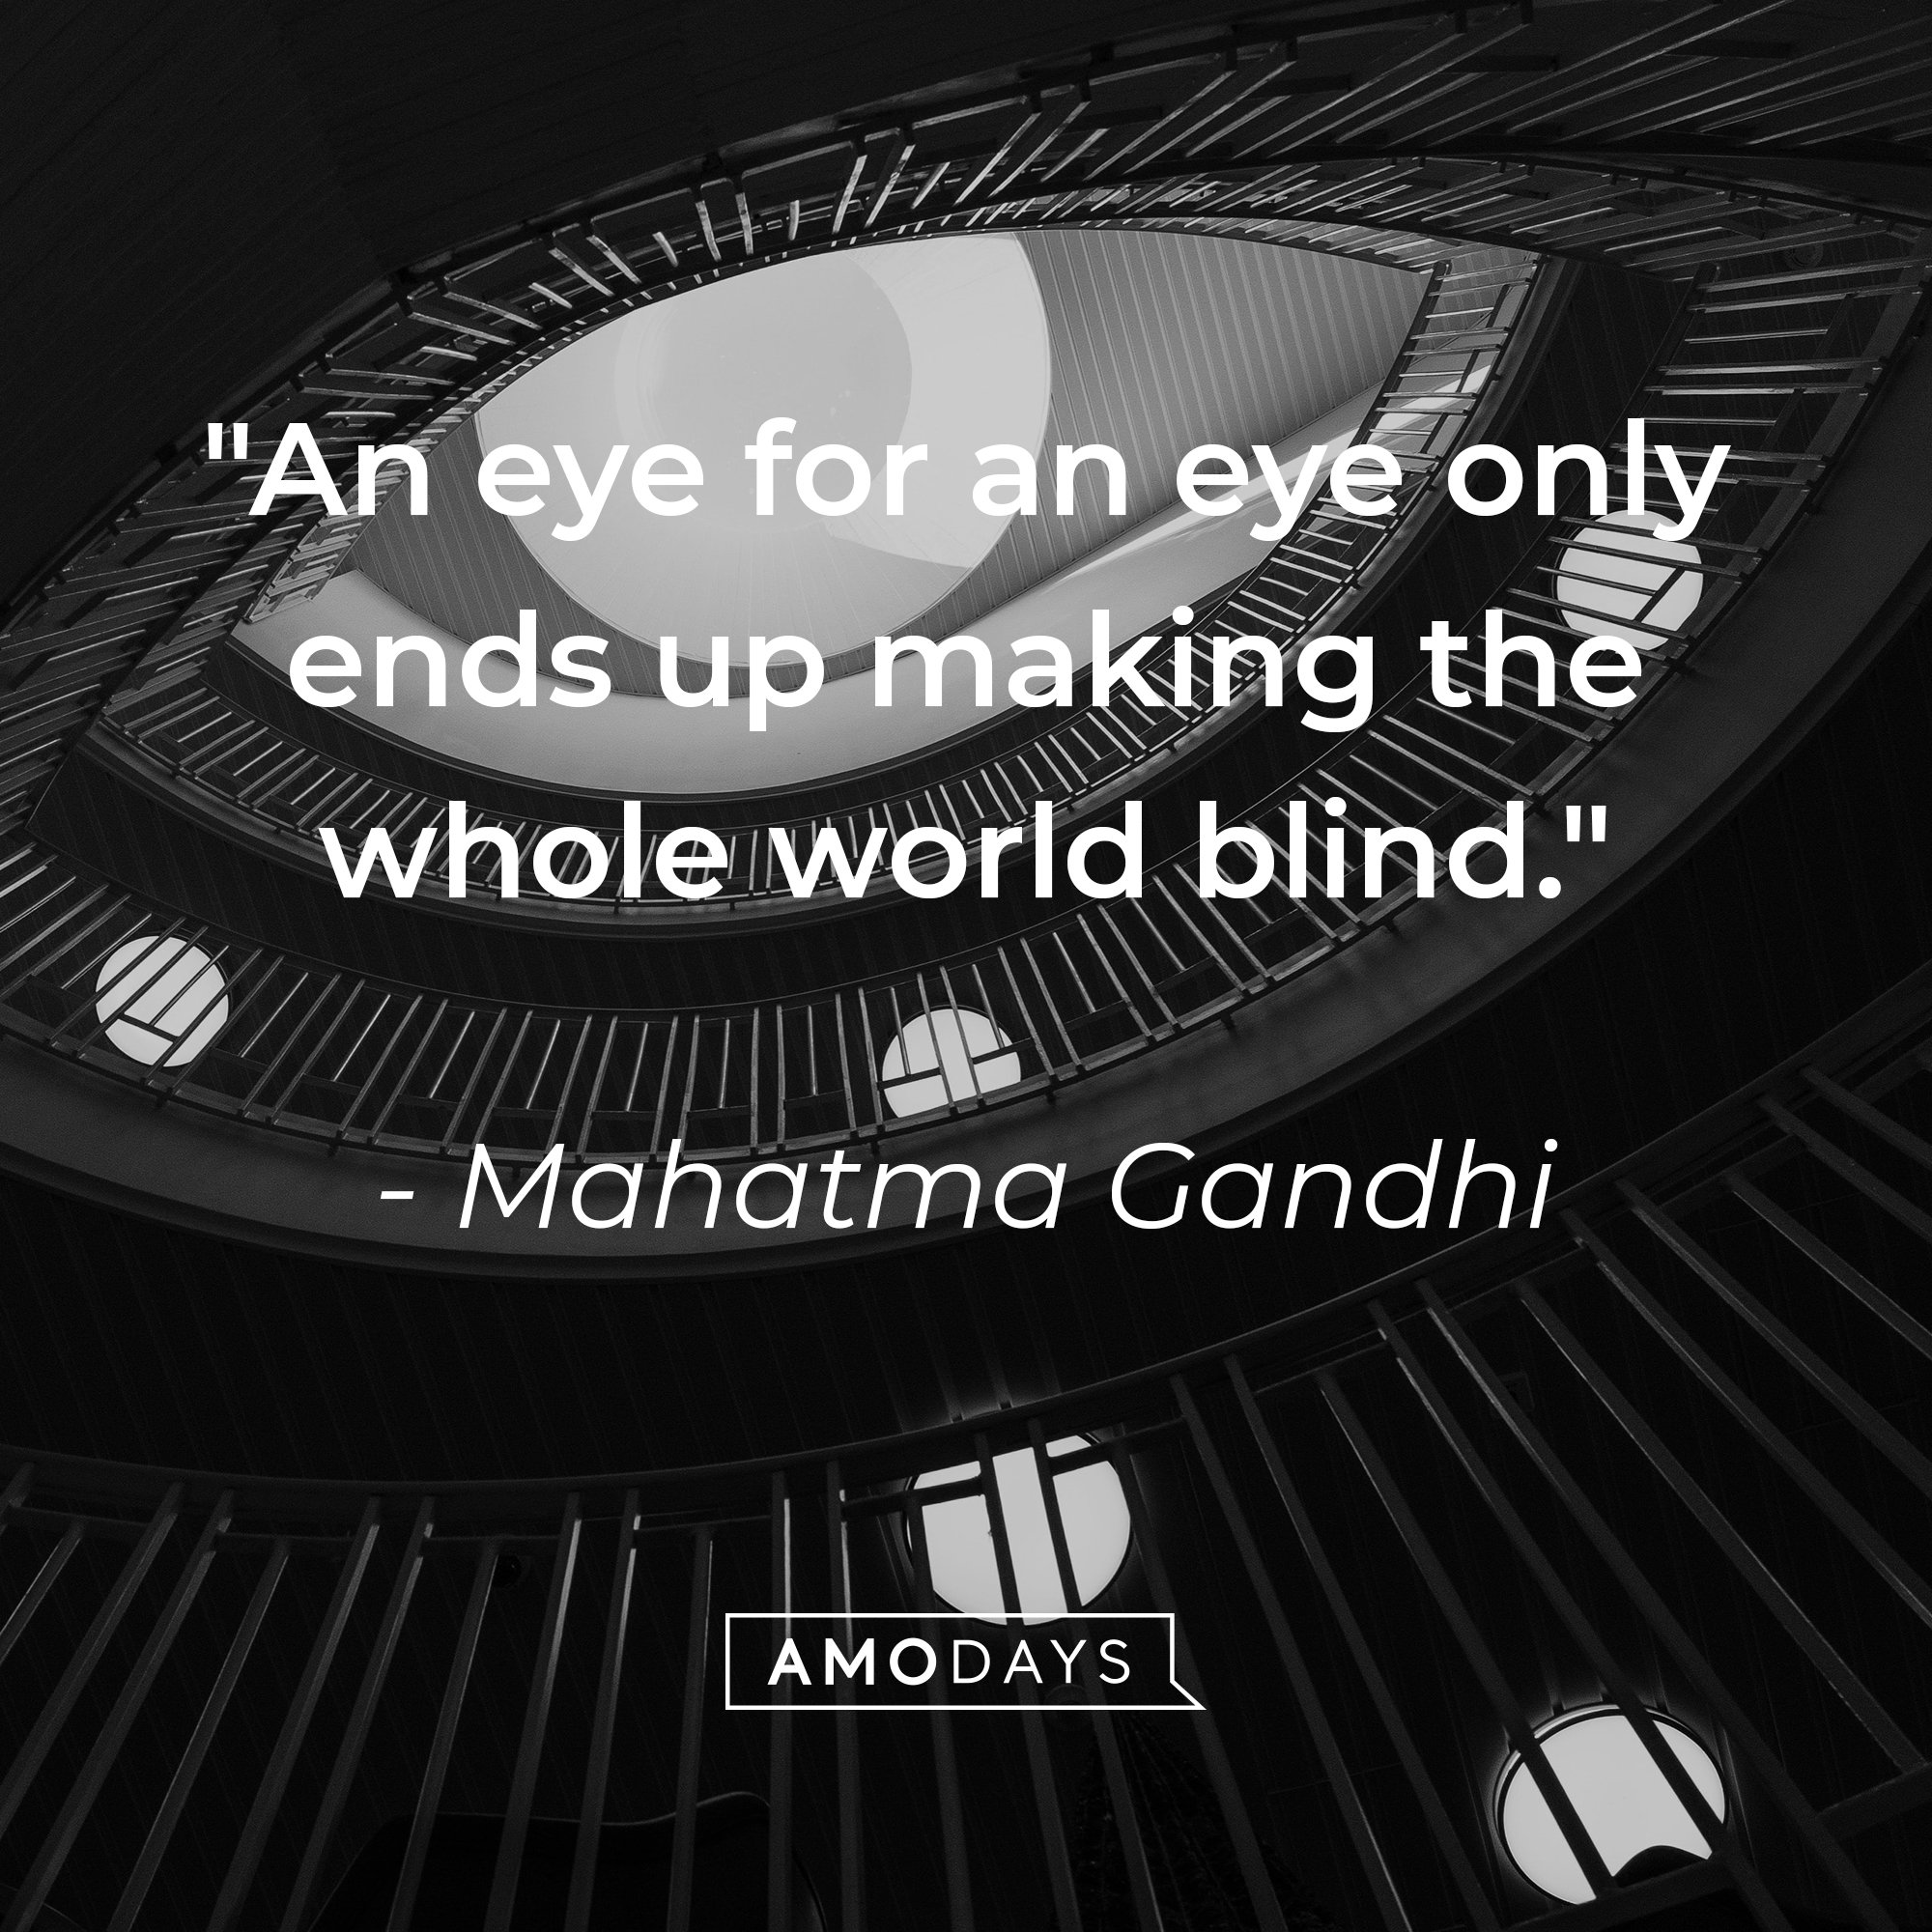 Mahatma Gandhi’s quote: "An eye for an eye only ends up making the whole world blind." | Image: Amodays    